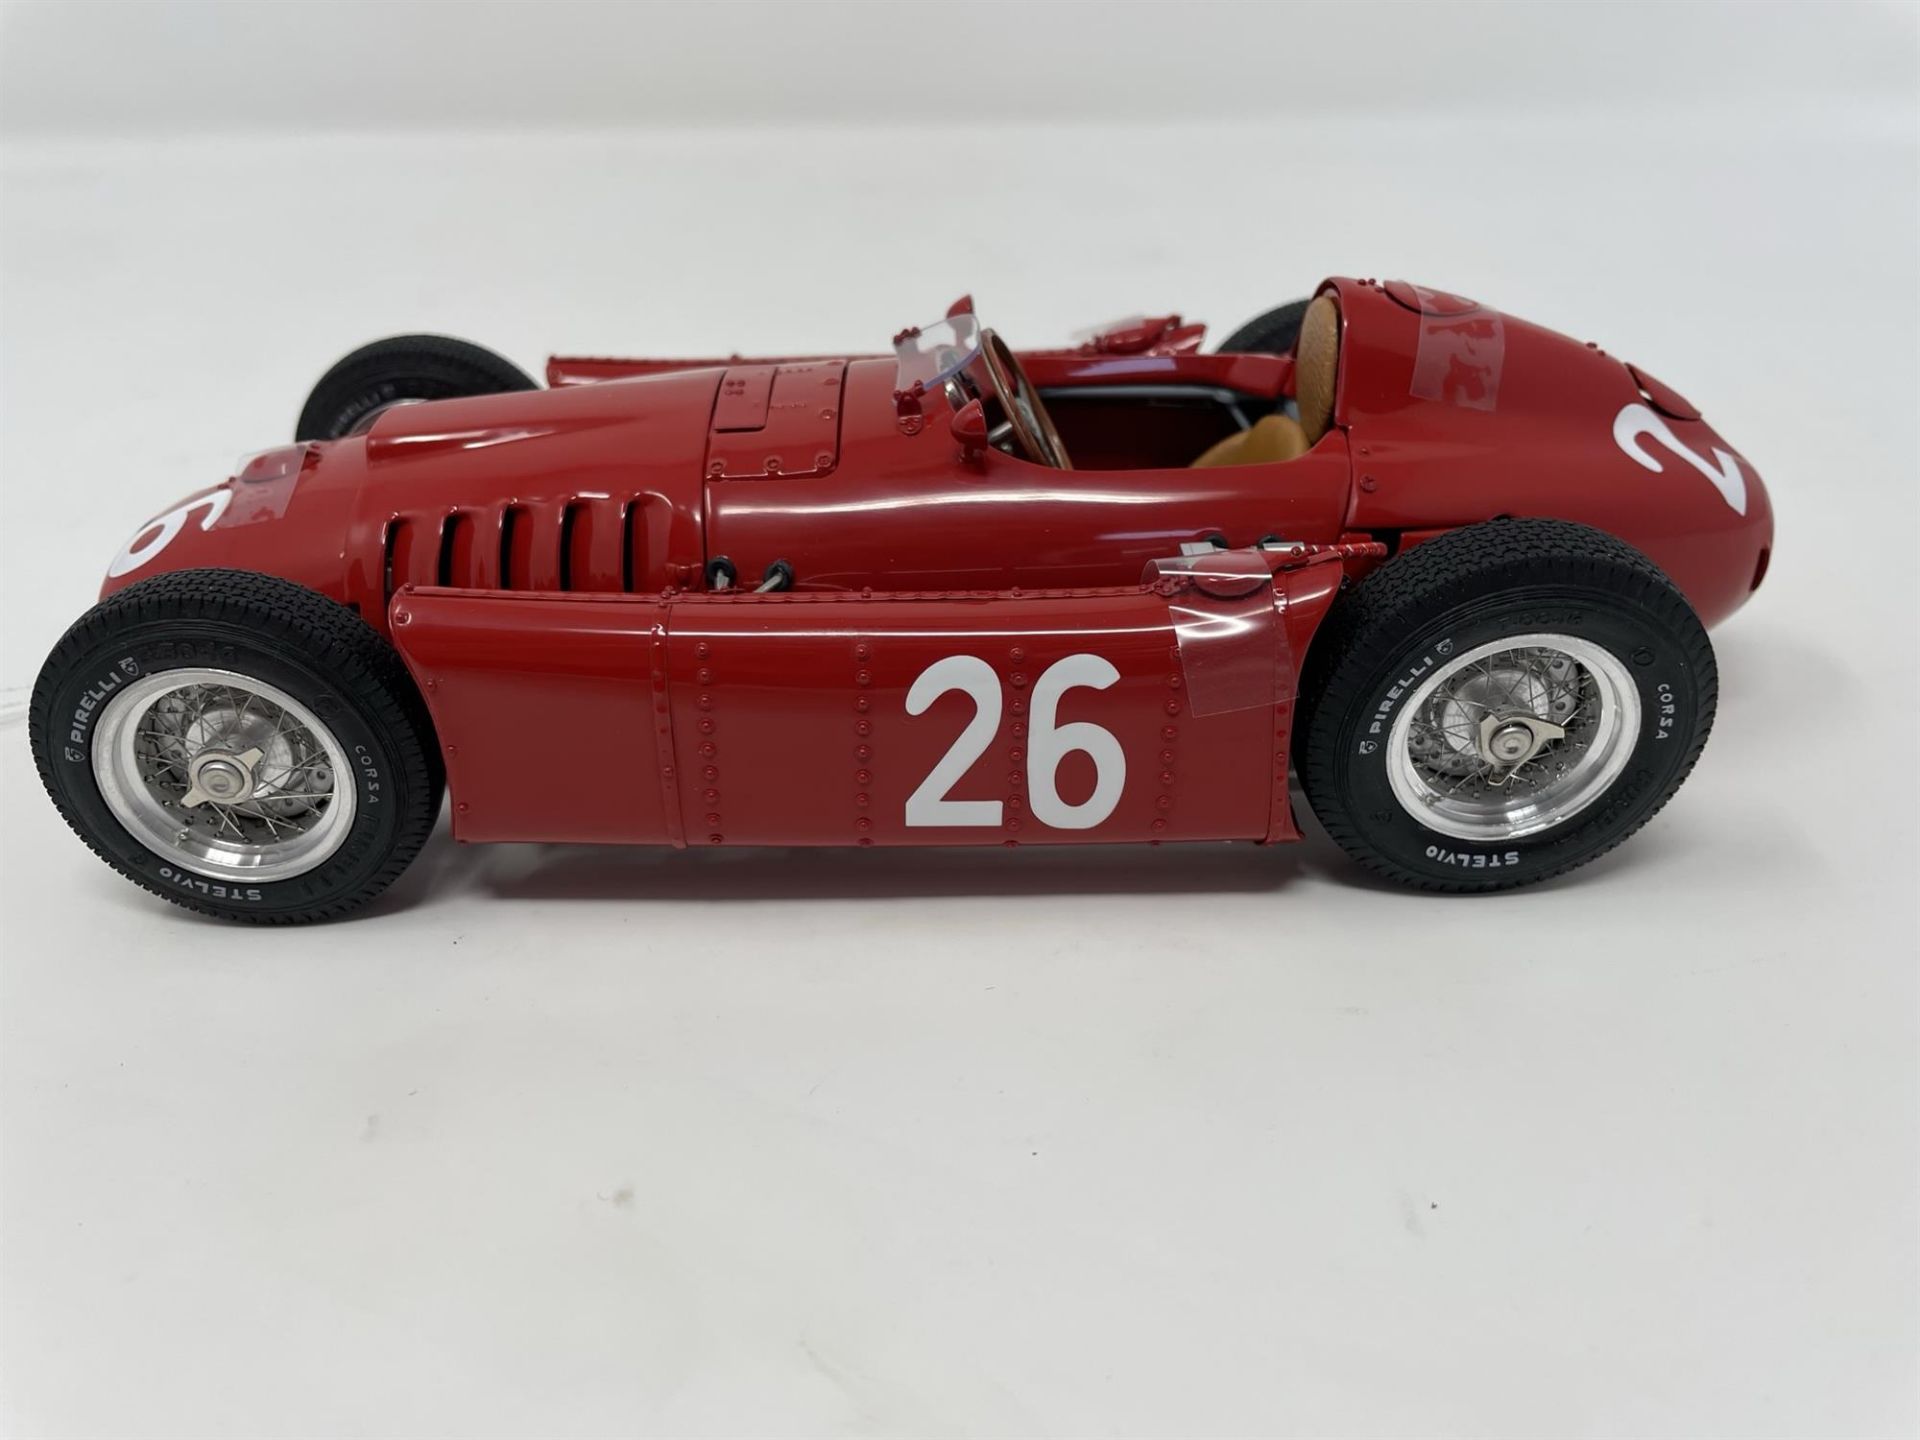 CMC Lancia D50 1:18th Scale Highly Detailed Model